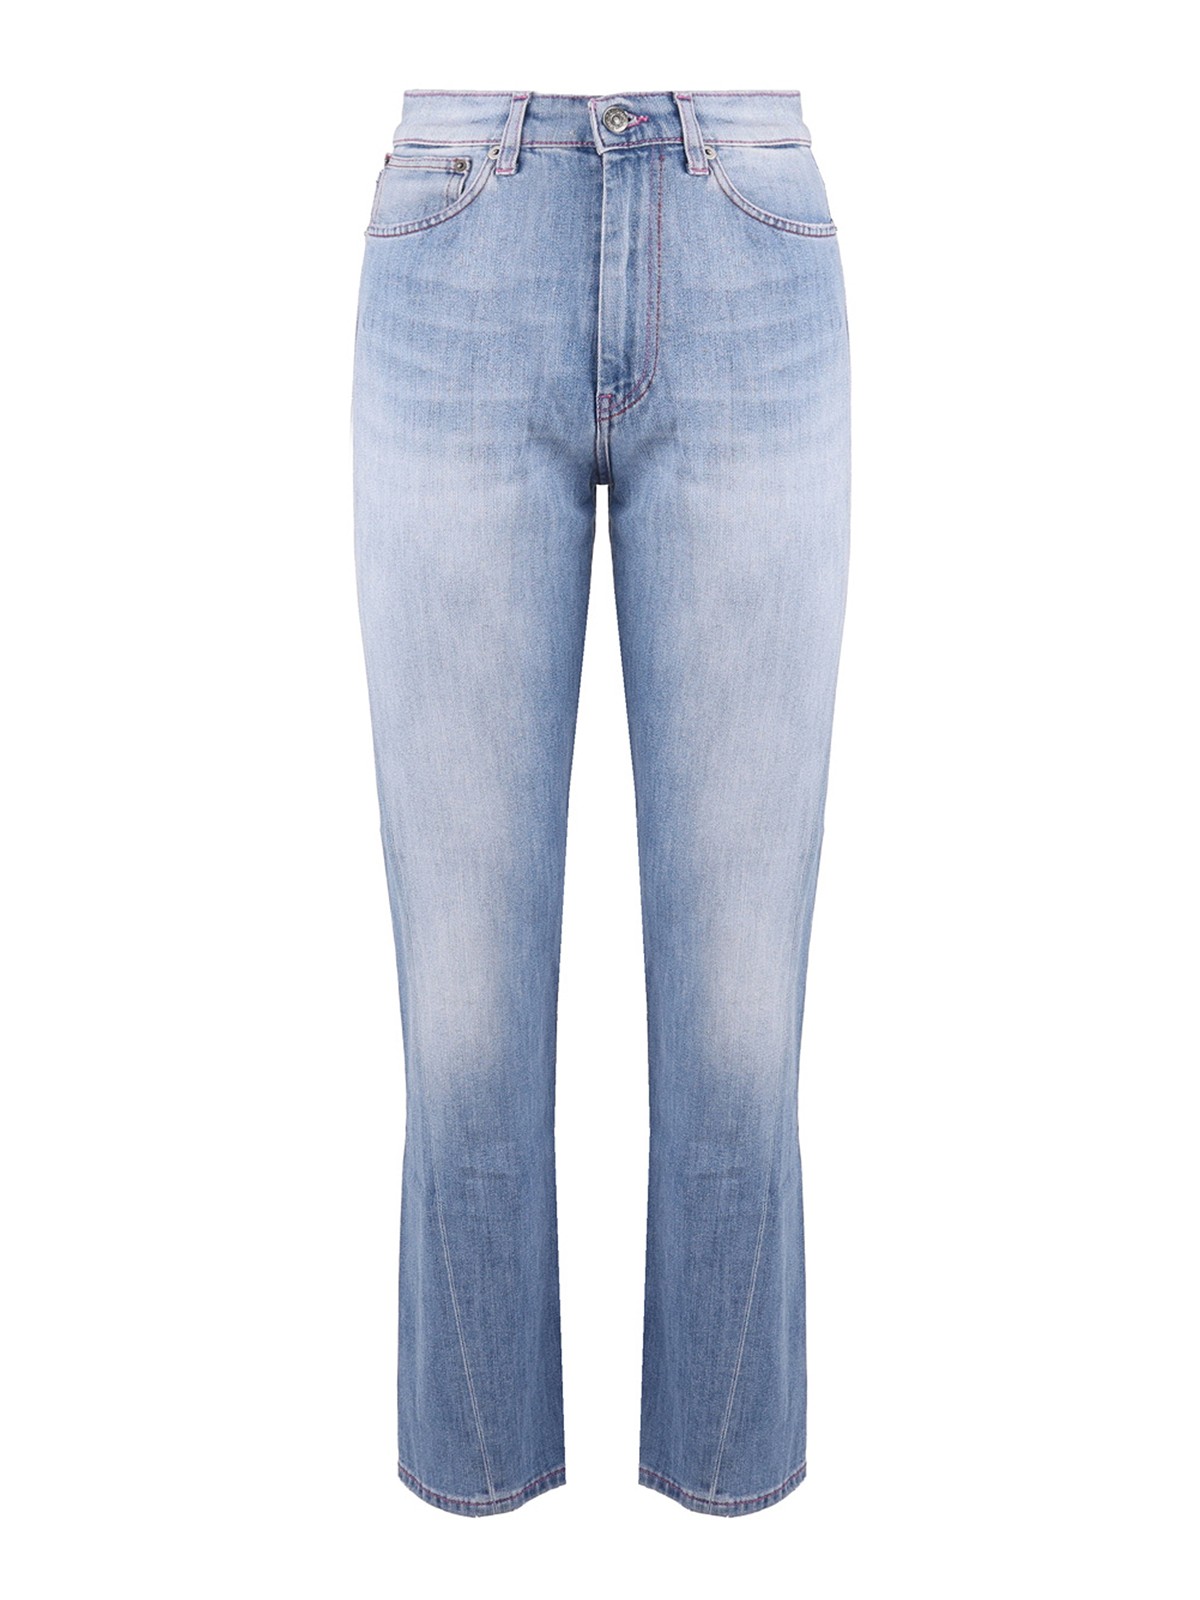 Shop Dondup Jeans Twisted In Light Wash